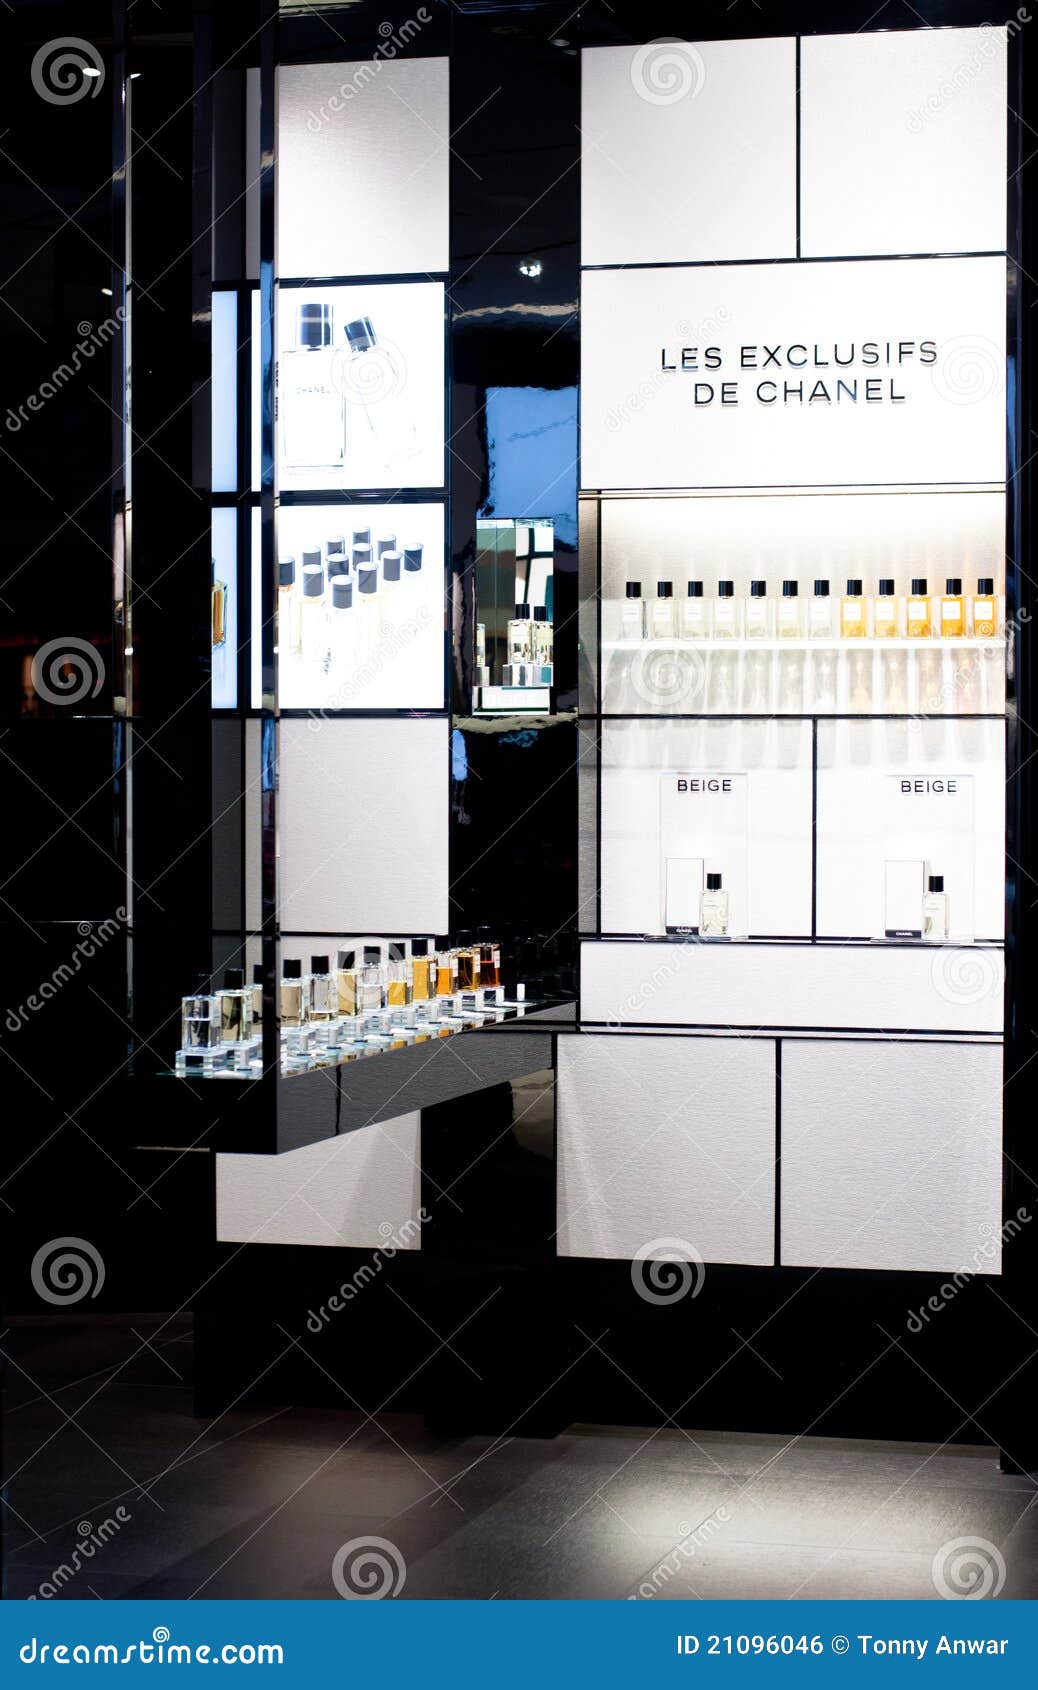 Chanel Les Exclusifs 1957 Limited Edition Perfume - Perfume News